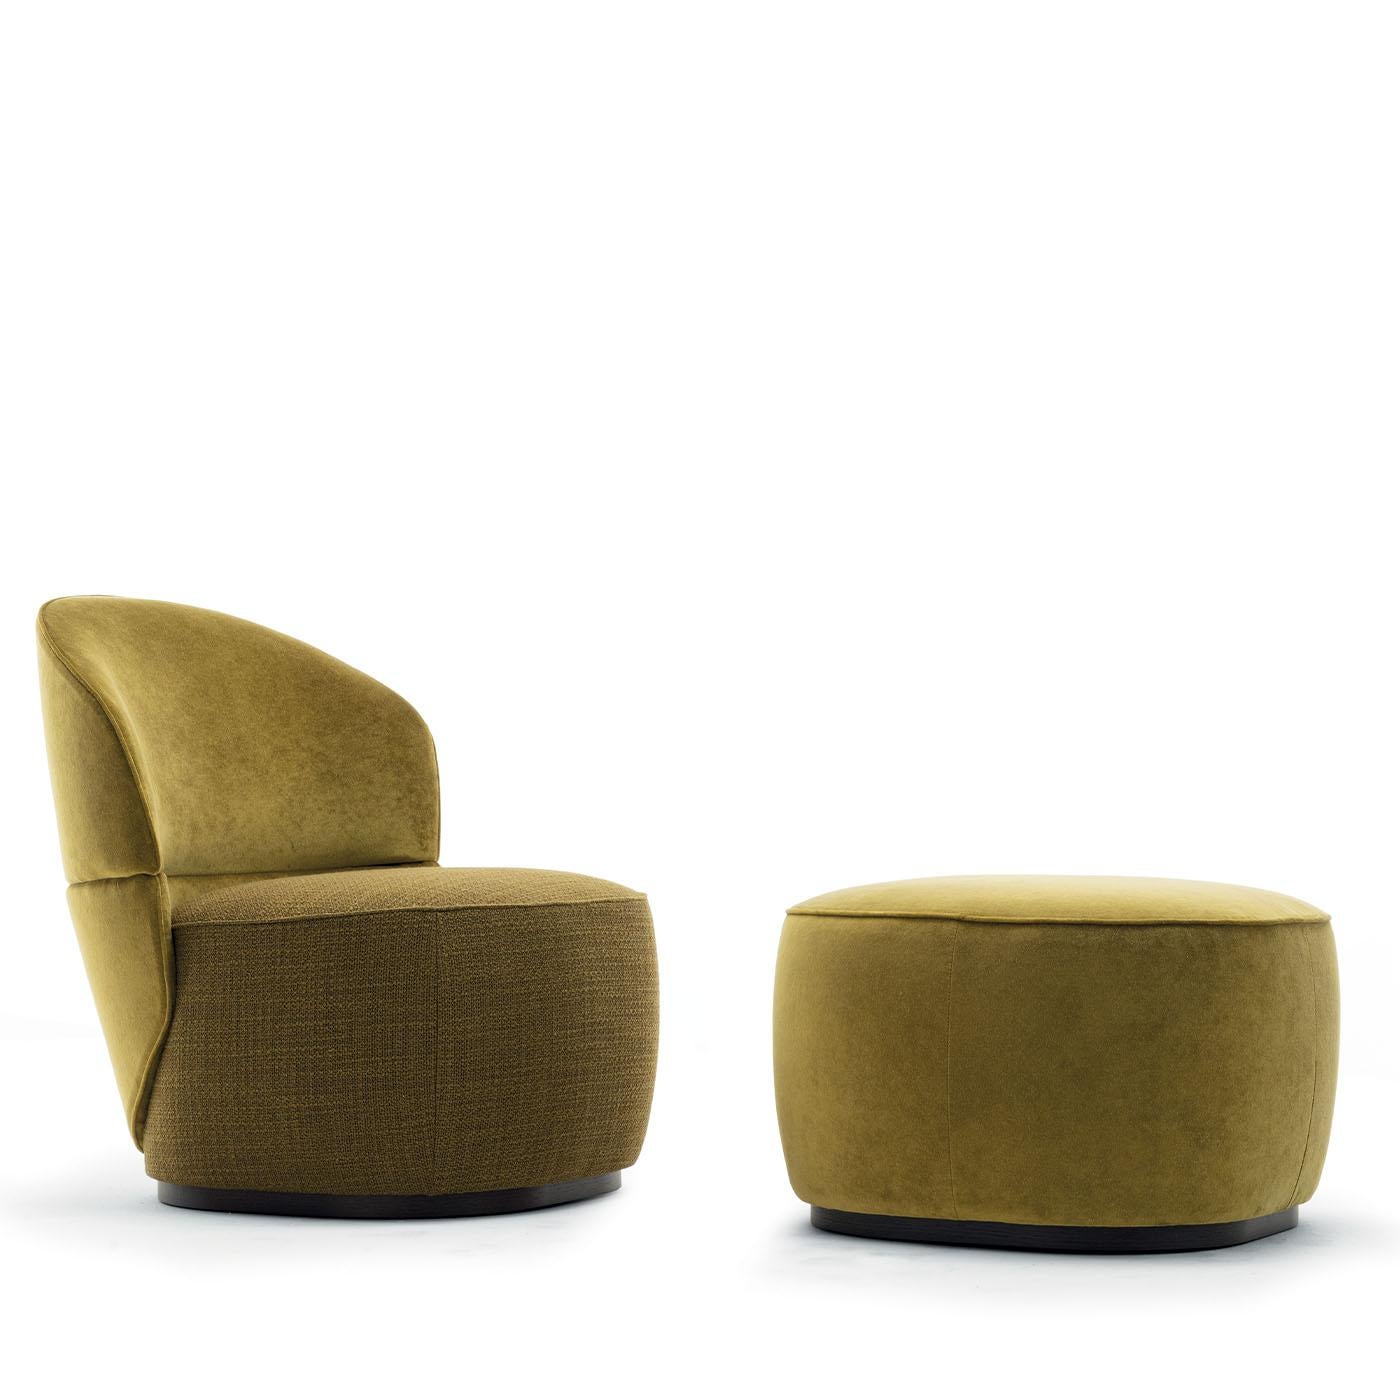 Enveloping curves outline the sleek silhouette of this armchair, a lively addition to neutral-toned modern decors. Sealed by an EX fabric upholstery offered in a vibrant acid-green hue, its volumes ensure impeccable comfort, guaranteed by the